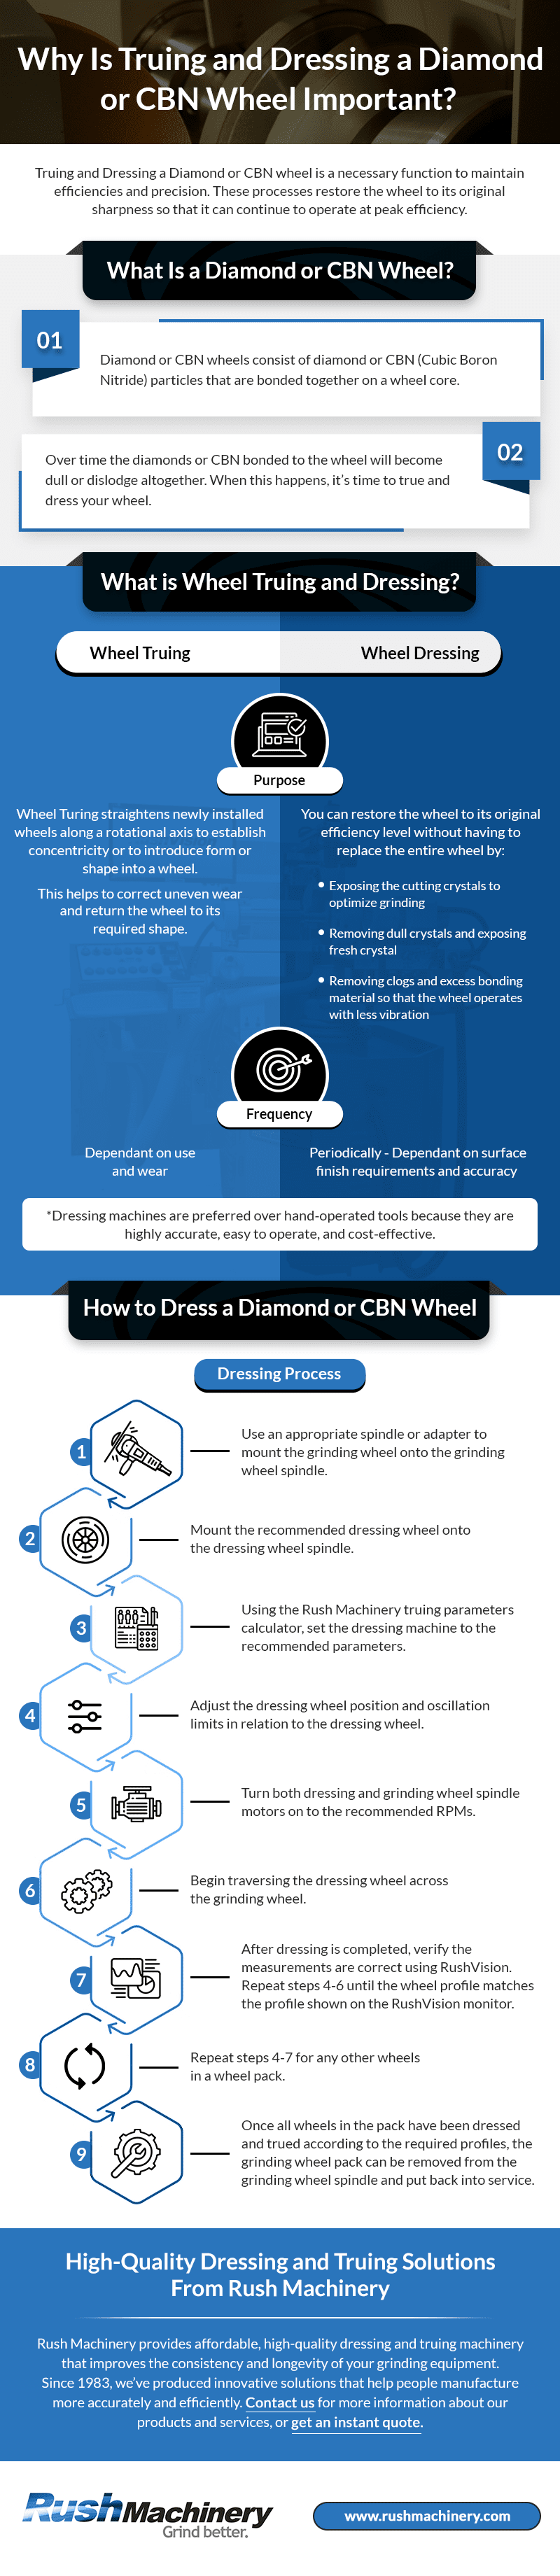 Why Is Truing and Dressing a Diamond or CBN Wheel Important?